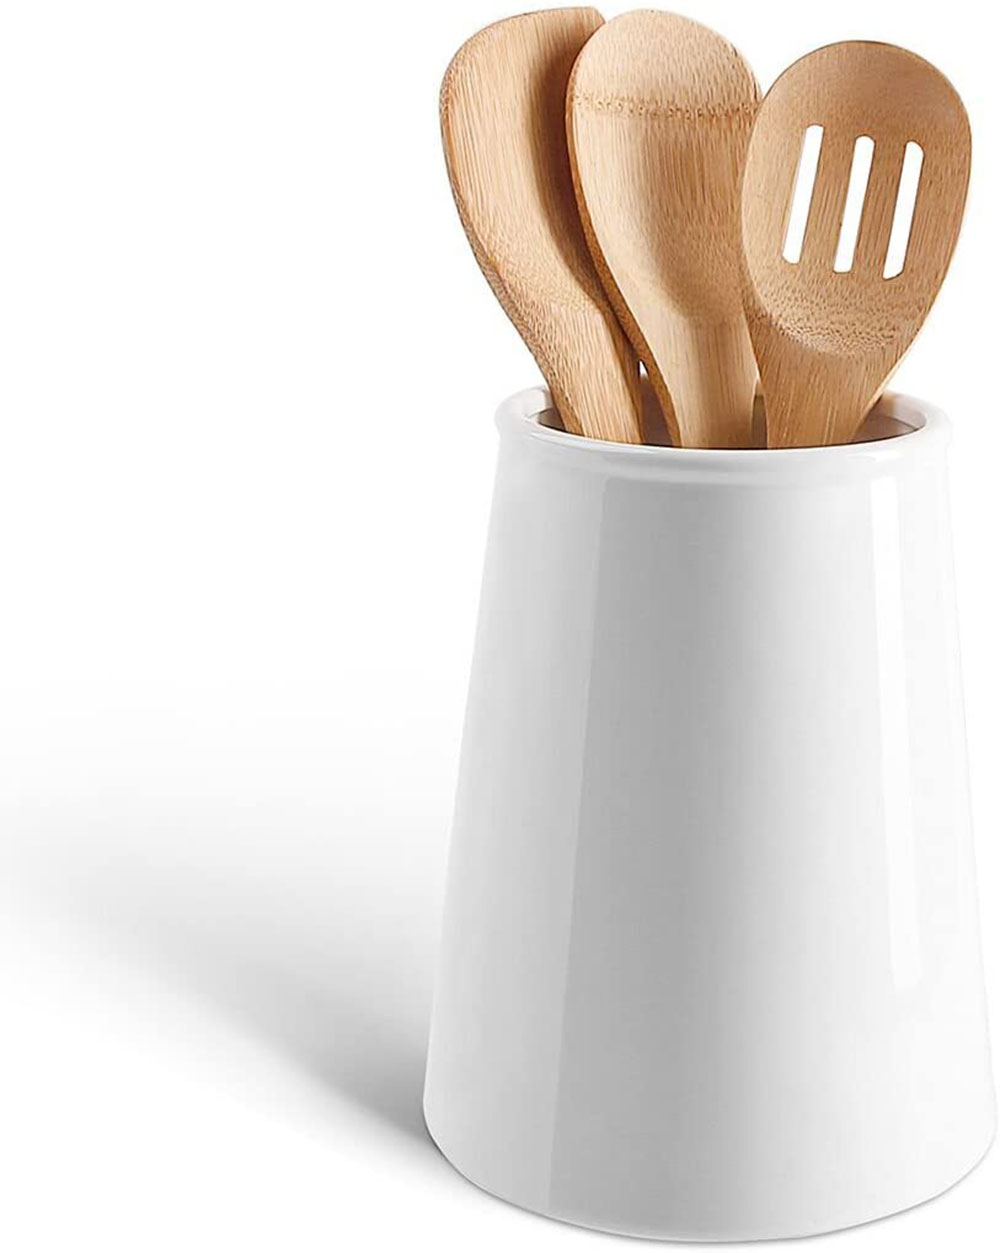 Sweese-Porcelain-Utensil-Holder What's the best kitchen utensil holder out there?